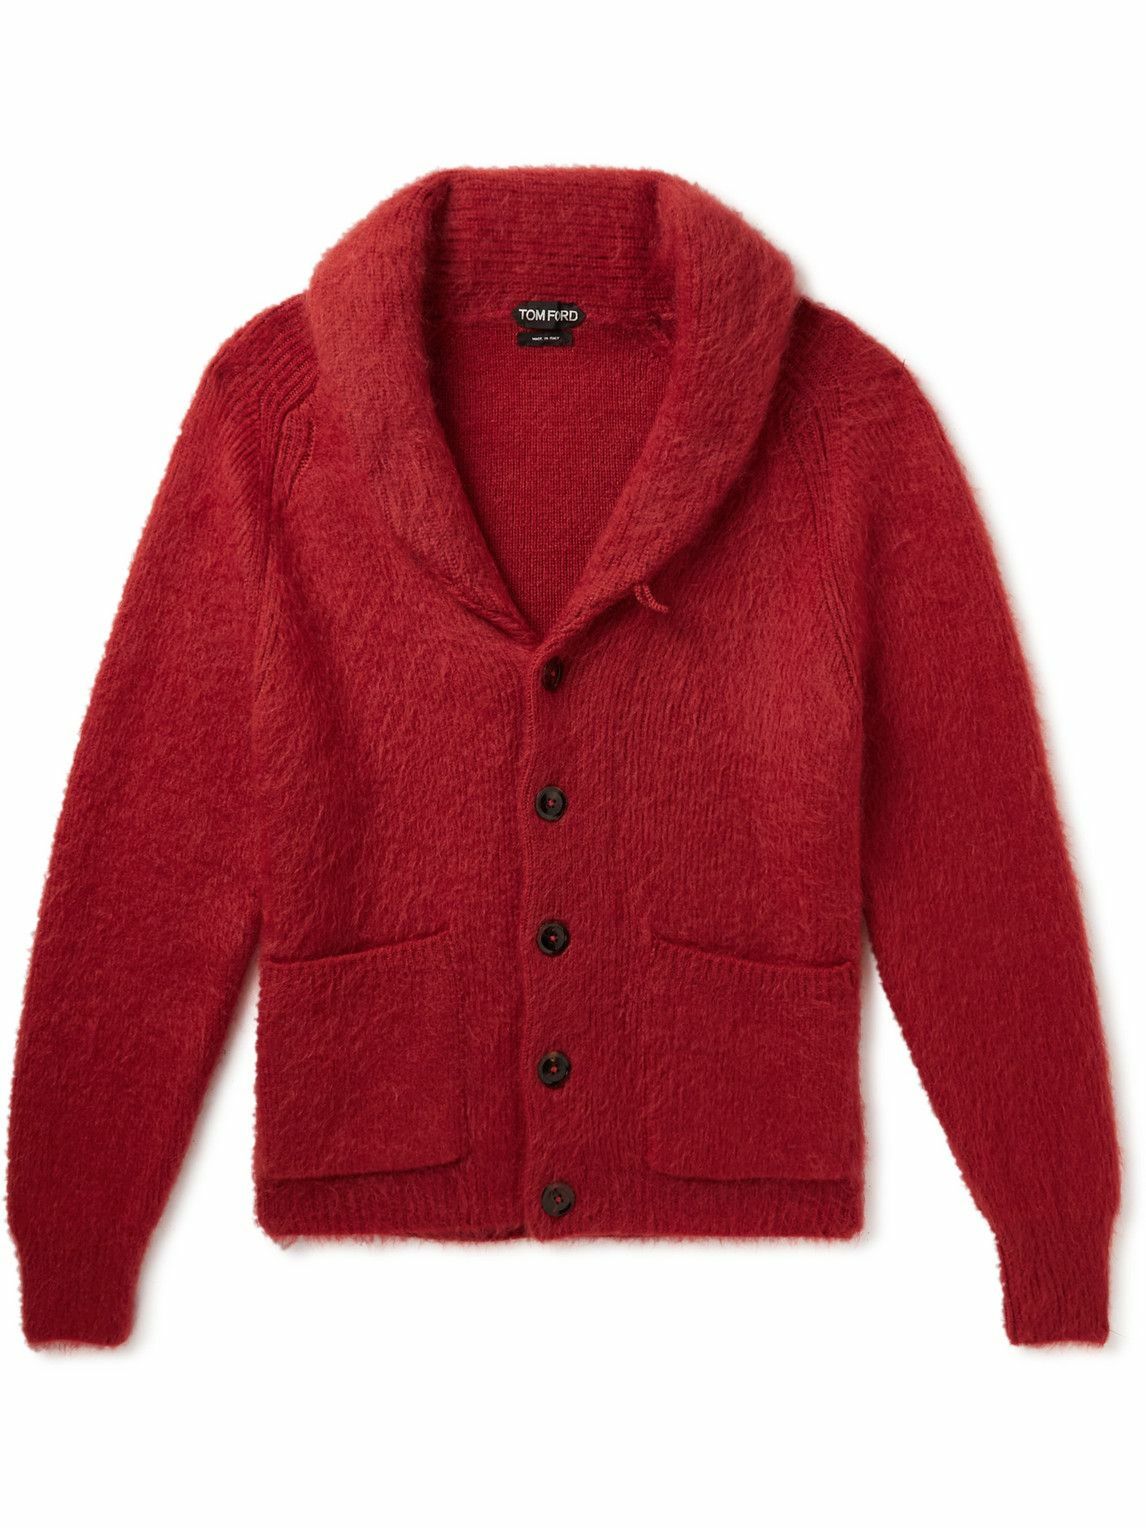 TOM FORD - Shawl-Collar Wool, Silk and Mohair-Blend Cardigan - Red TOM FORD